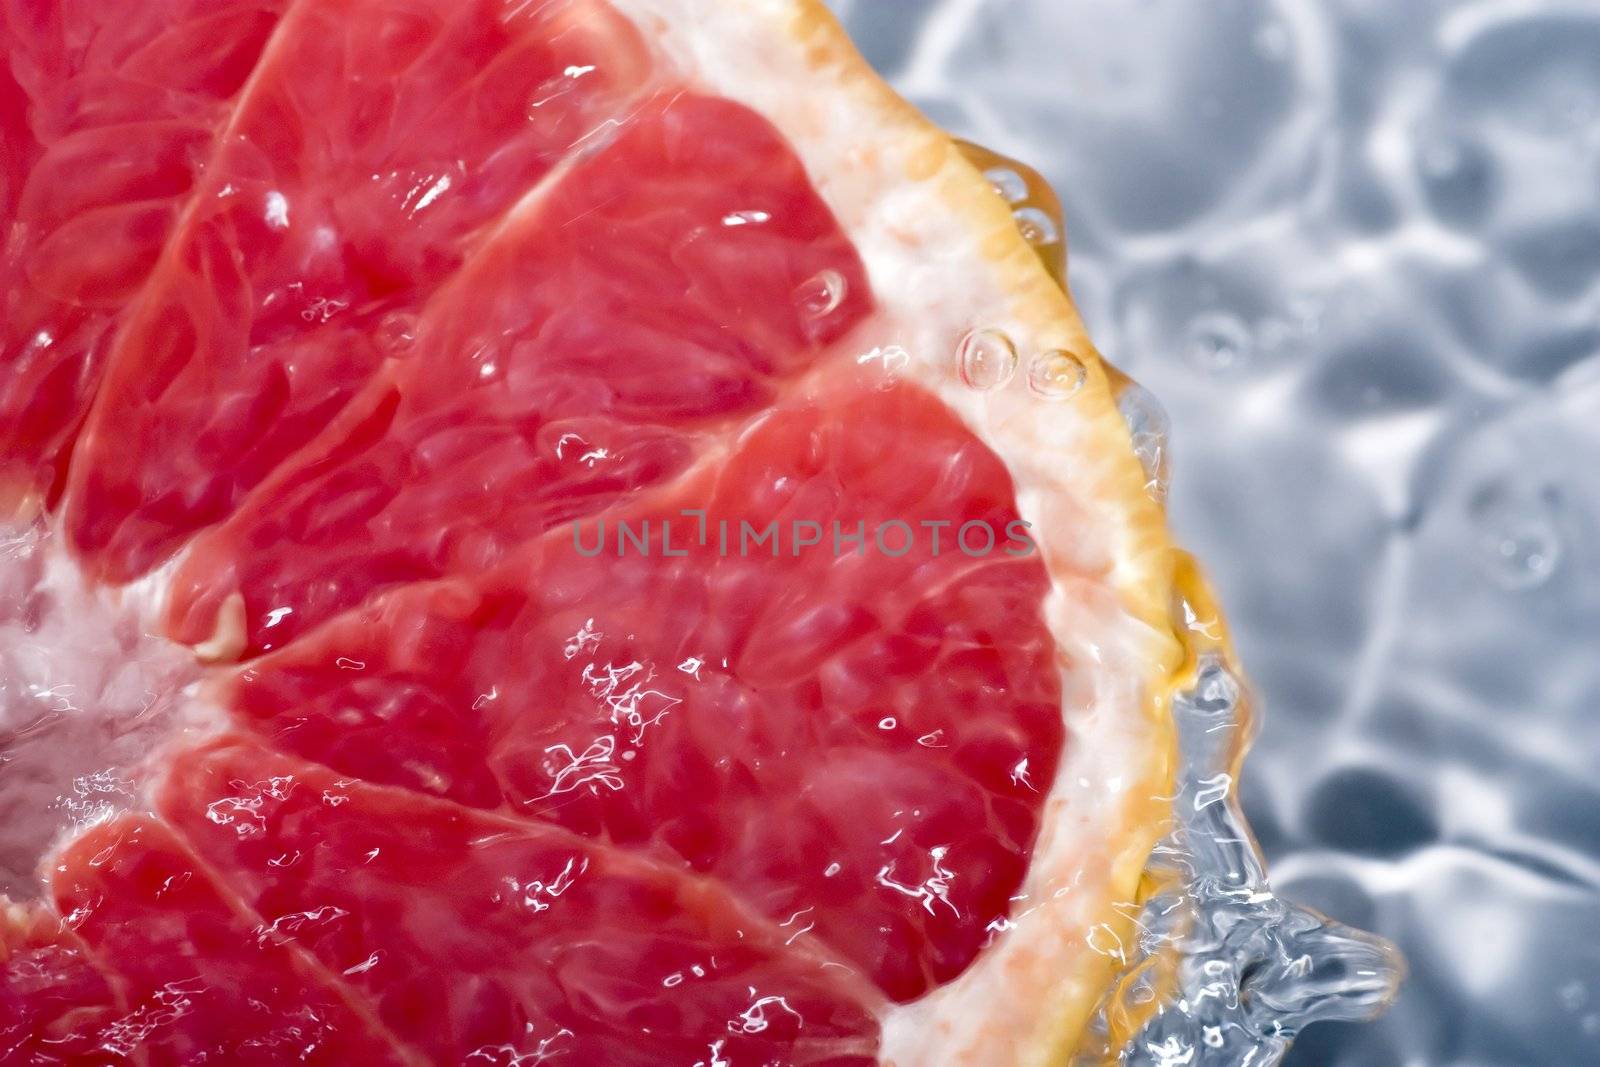 Grapefruit under running water, with water running over sides.